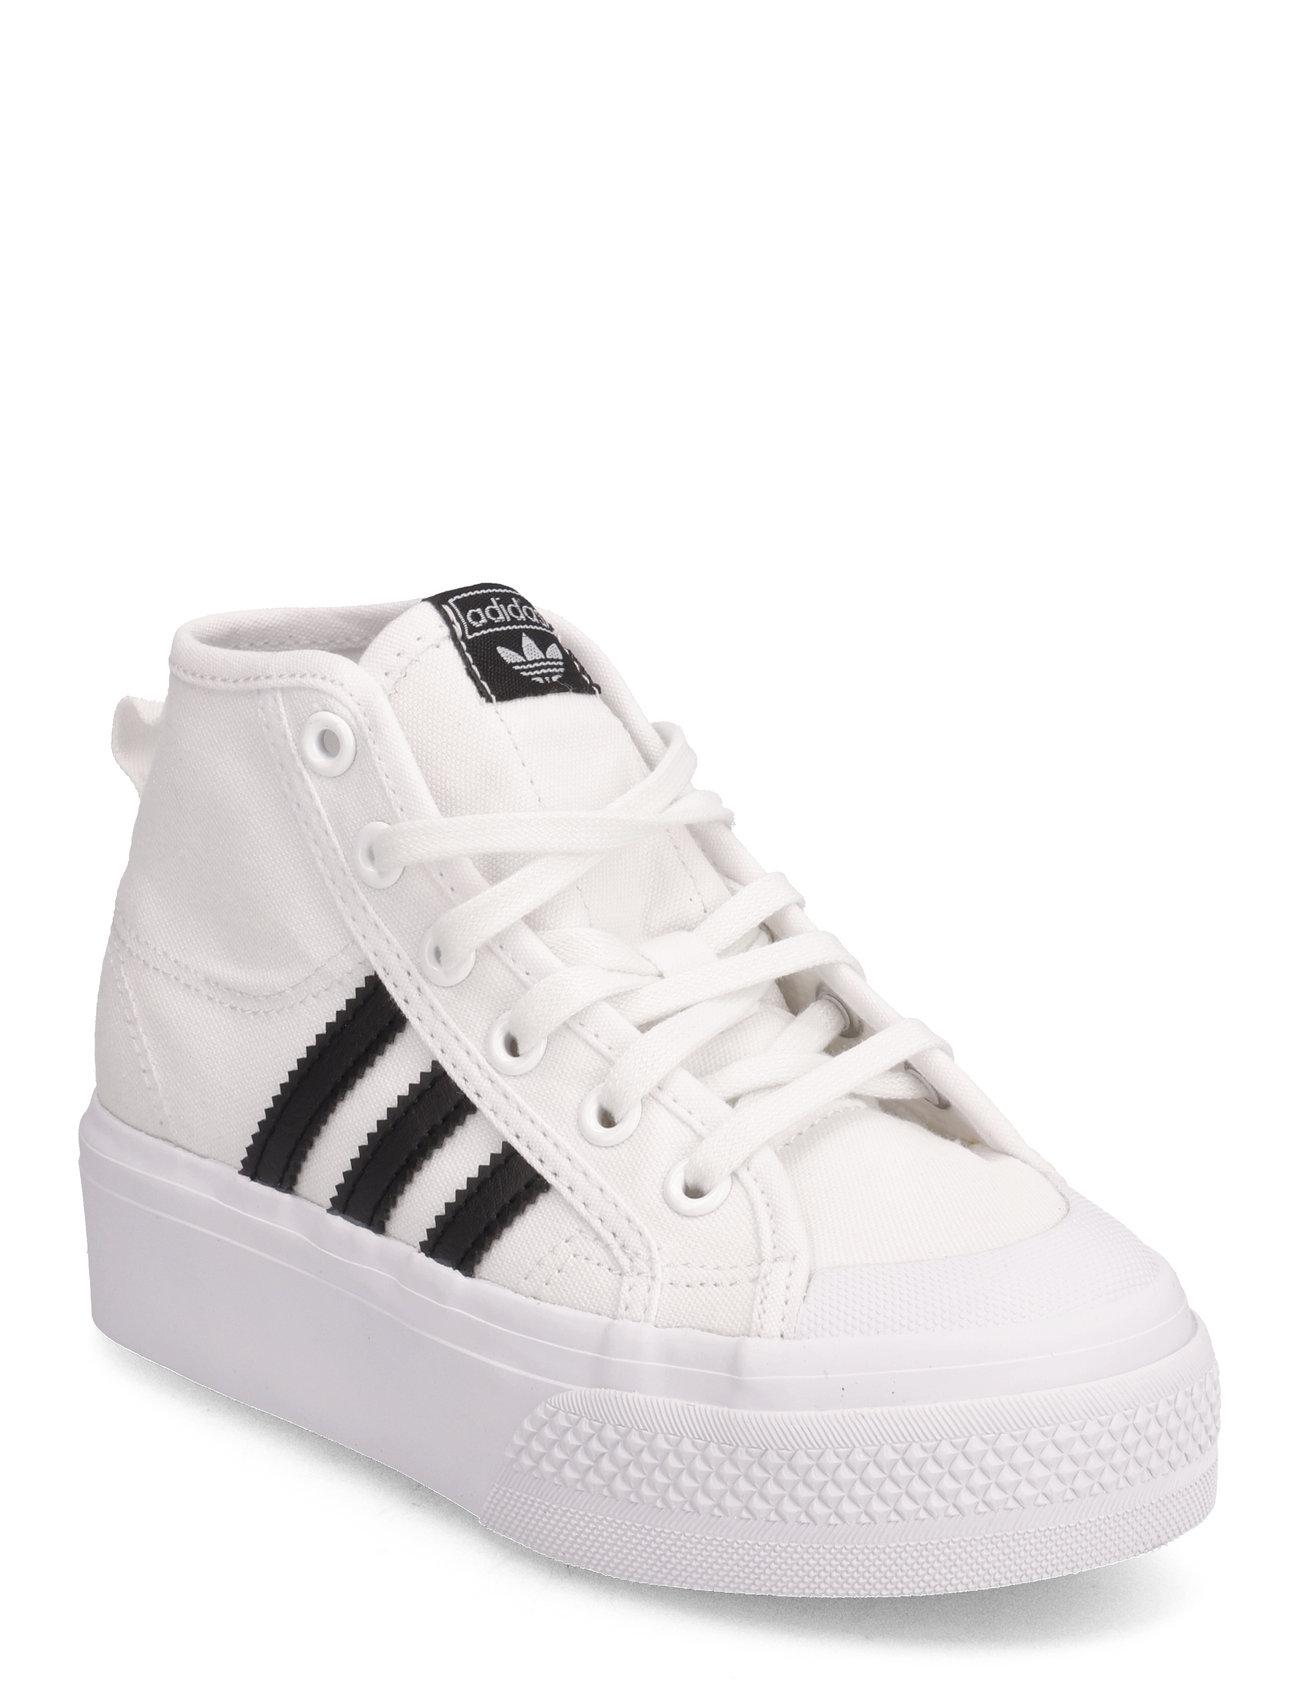 Nizza Platform Mid Shoes Sport Sneakers High-top Sneakers White Adidas Originals